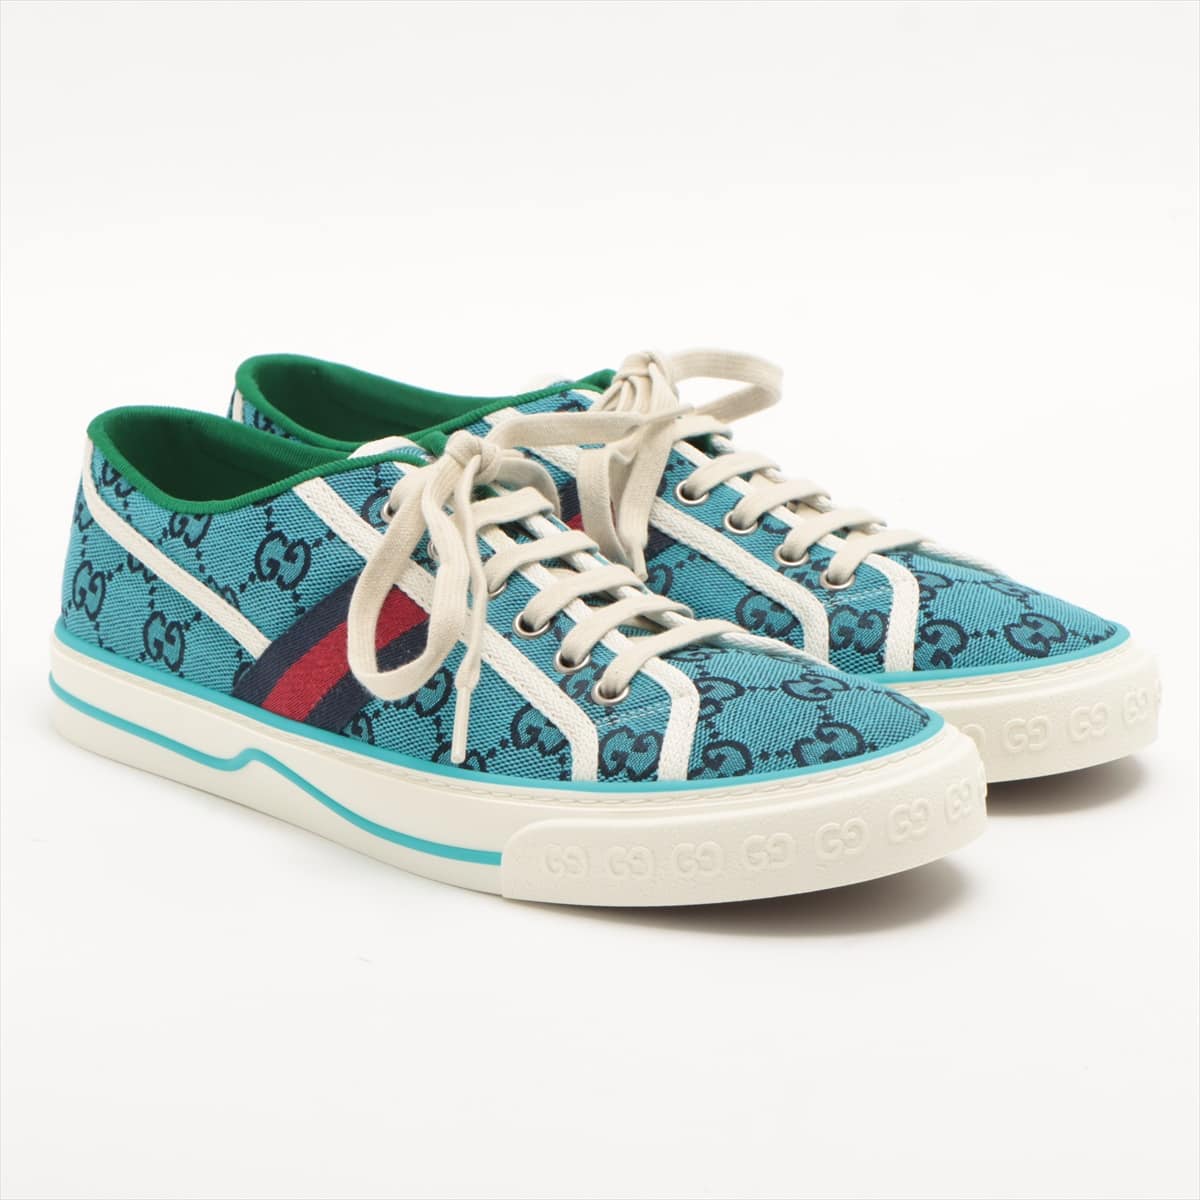 Gucci GG Canvas canvass Sneakers 6+ Men's Blue Tennis 1977 There is a box